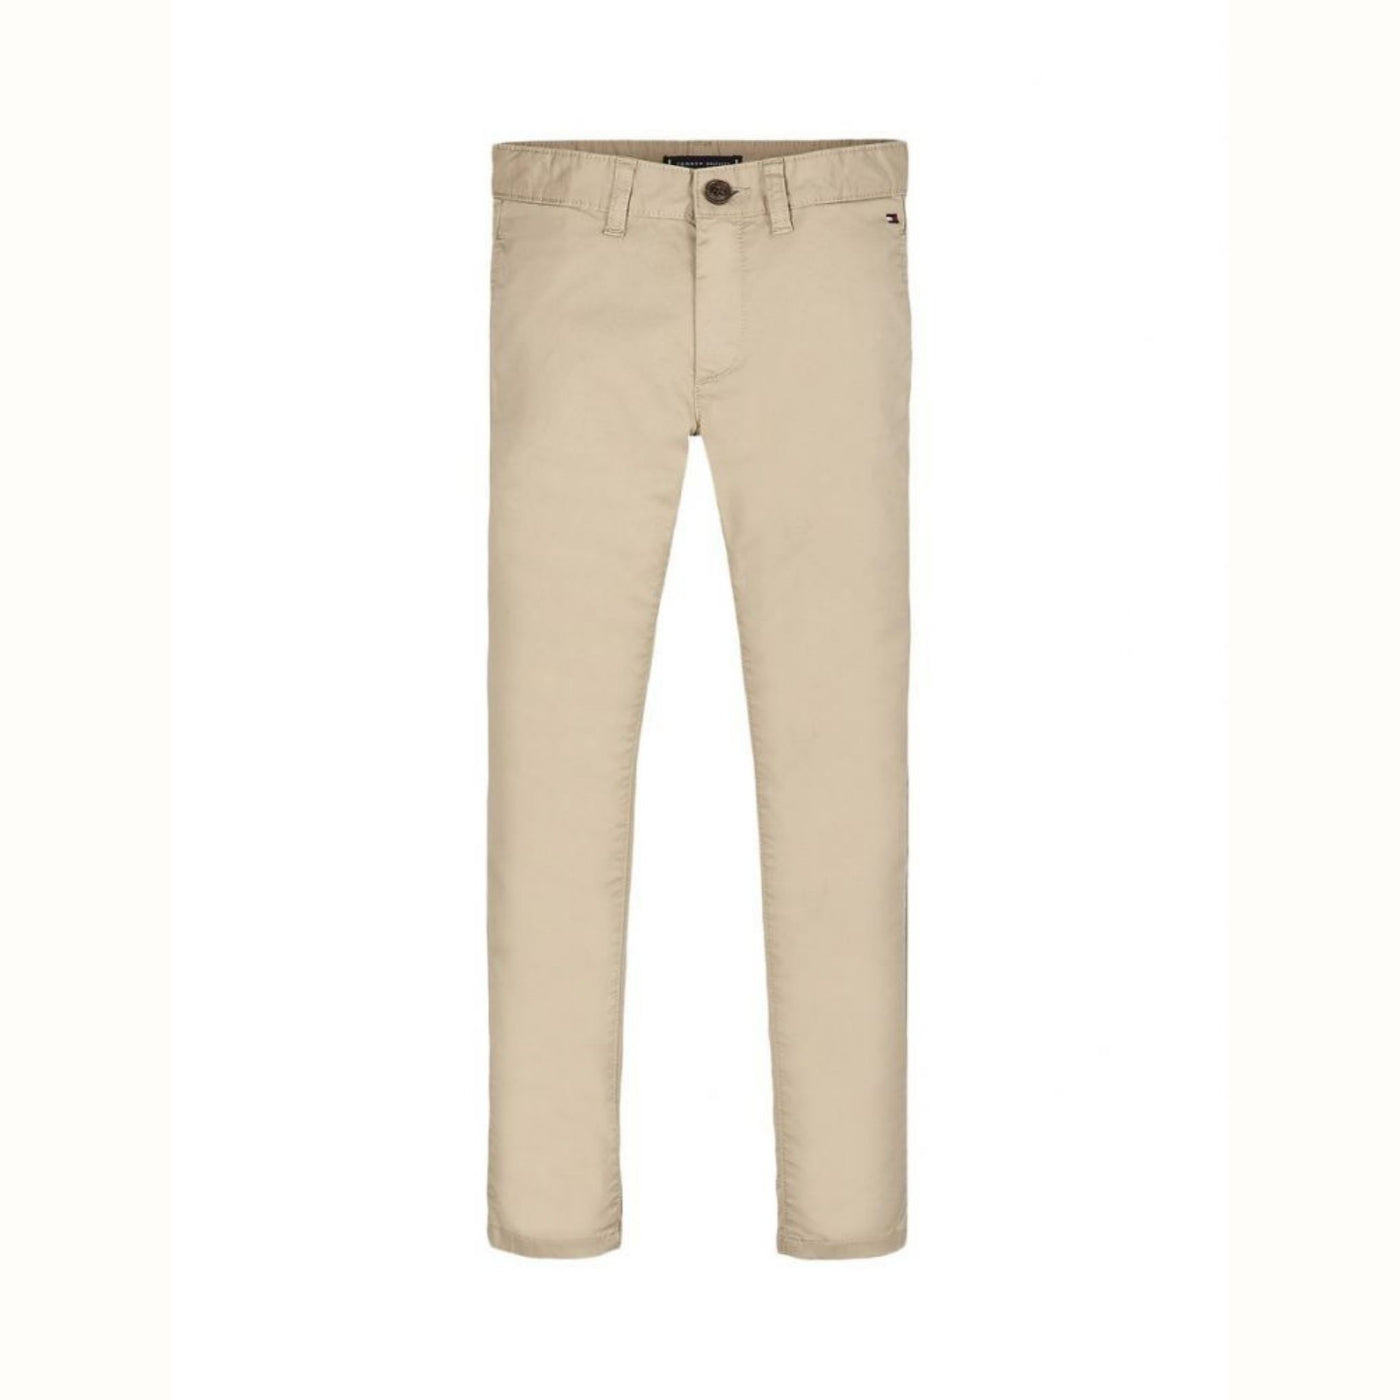 Boy's cotton trousers with pockets